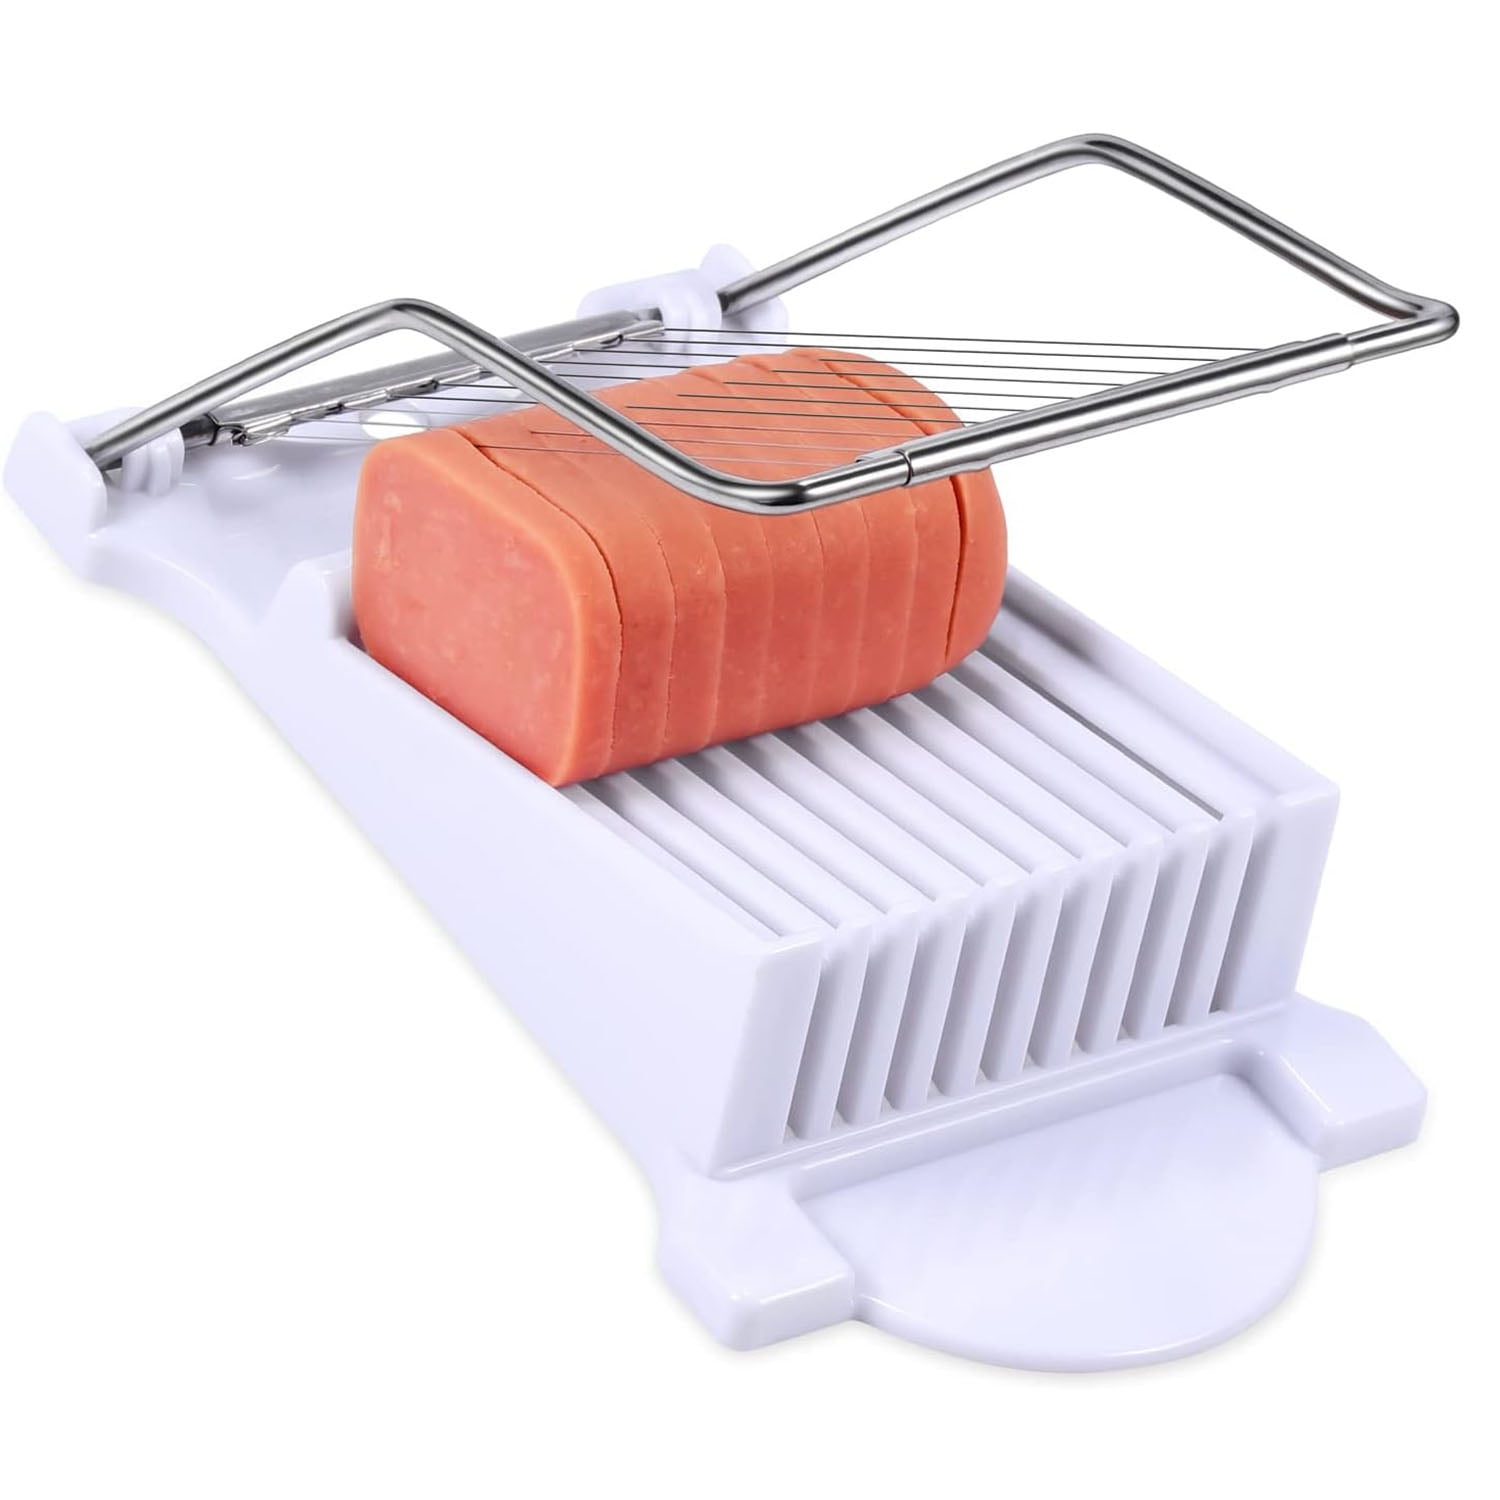 NEW 10 Wires Stainless Steel Soft Food Cutter Egg Fruit Slicer Cheese  Kitchen Tools Spam Grinders Luncheon Meat Slicer - Buy NEW 10 Wires  Stainless Steel Soft Food Cutter Egg Fruit Slicer